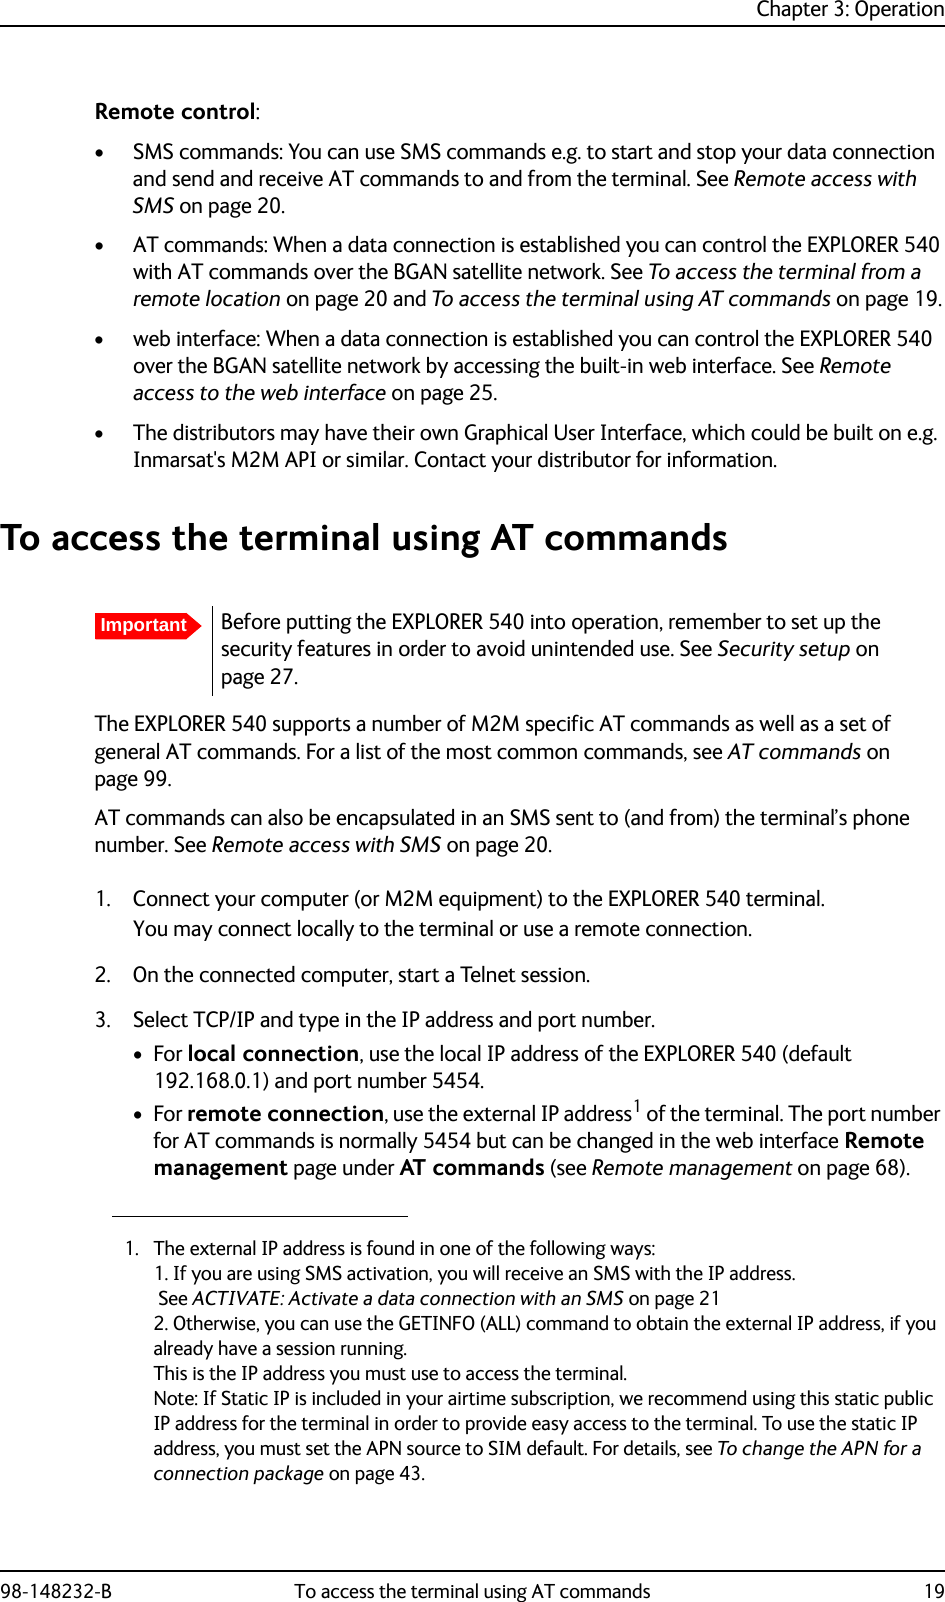 Chapter 3: Operation98-148232-B To access the terminal using AT commands 19Remote control:• SMS commands: You can use SMS commands e.g. to start and stop your data connection and send and receive AT commands to and from the terminal. See Remote access with SMS on page 20.• AT commands: When a data connection is established you can control the EXPLORER 540 with AT commands over the BGAN satellite network. See To access the terminal from a remote location on page 20 and To access the terminal using AT commands on page 19.• web interface: When a data connection is established you can control the EXPLORER 540 over the BGAN satellite network by accessing the built-in web interface. See Remote access to the web interface on page 25.• The distributors may have their own Graphical User Interface, which could be built on e.g. Inmarsat&apos;s M2M API or similar. Contact your distributor for information.To access the terminal using AT commandsThe EXPLORER 540 supports a number of M2M specific AT commands as well as a set of general AT commands. For a list of the most common commands, see AT commands on page 99.AT commands can also be encapsulated in an SMS sent to (and from) the terminal’s phone number. See Remote access with SMS on page 20.1. Connect your computer (or M2M equipment) to the EXPLORER 540 terminal.You may connect locally to the terminal or use a remote connection.2. On the connected computer, start a Telnet session.3. Select TCP/IP and type in the IP address and port number.•For local connection, use the local IP address of the EXPLORER 540 (default 192.168.0.1) and port number 5454. •For remote connection, use the external IP address1 of the terminal. The port number for AT commands is normally 5454 but can be changed in the web interface Remote management page under AT commands (see Remote management on page 68).ImportantBefore putting the EXPLORER 540 into operation, remember to set up the security features in order to avoid unintended use. See Security setup on page 27.1. The external IP address is found in one of the following ways:1. If you are using SMS activation, you will receive an SMS with the IP address. See ACTIVATE: Activate a data connection with an SMS on page 212. Otherwise, you can use the GETINFO (ALL) command to obtain the external IP address, if you already have a session running.This is the IP address you must use to access the terminal.Note: If Static IP is included in your airtime subscription, we recommend using this static public IP address for the terminal in order to provide easy access to the terminal. To use the static IP address, you must set the APN source to SIM default. For details, see To change the APN for a connection package on page 43.